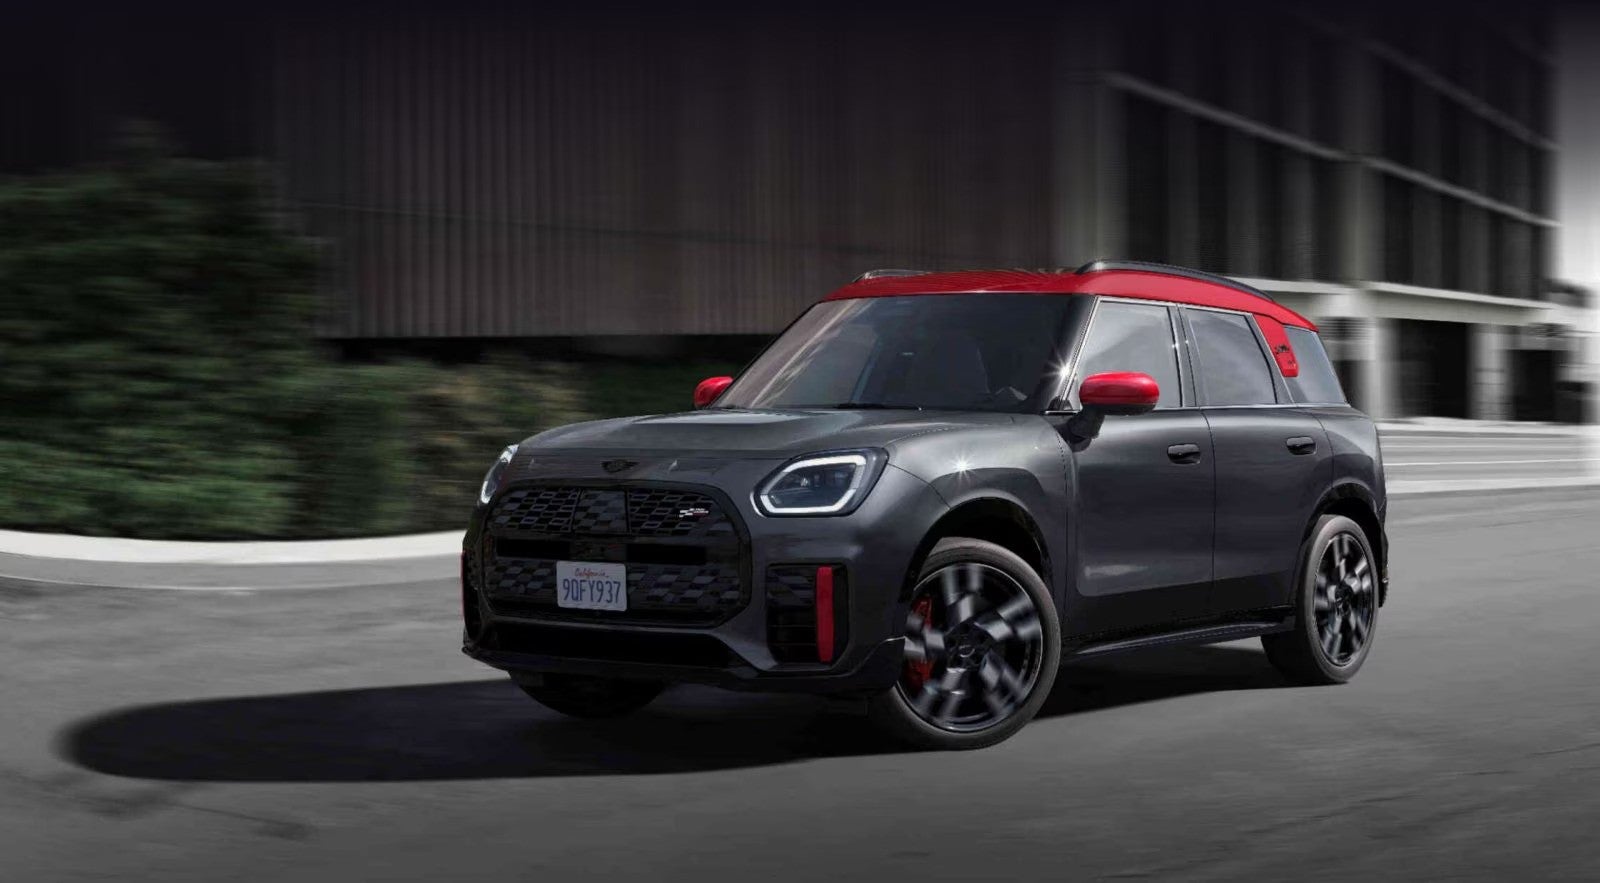  Three-quarters front view of a MINI JCW Countryman ALL4 driving in an urban setting with its shadow underneath it and surroundings blurred out.